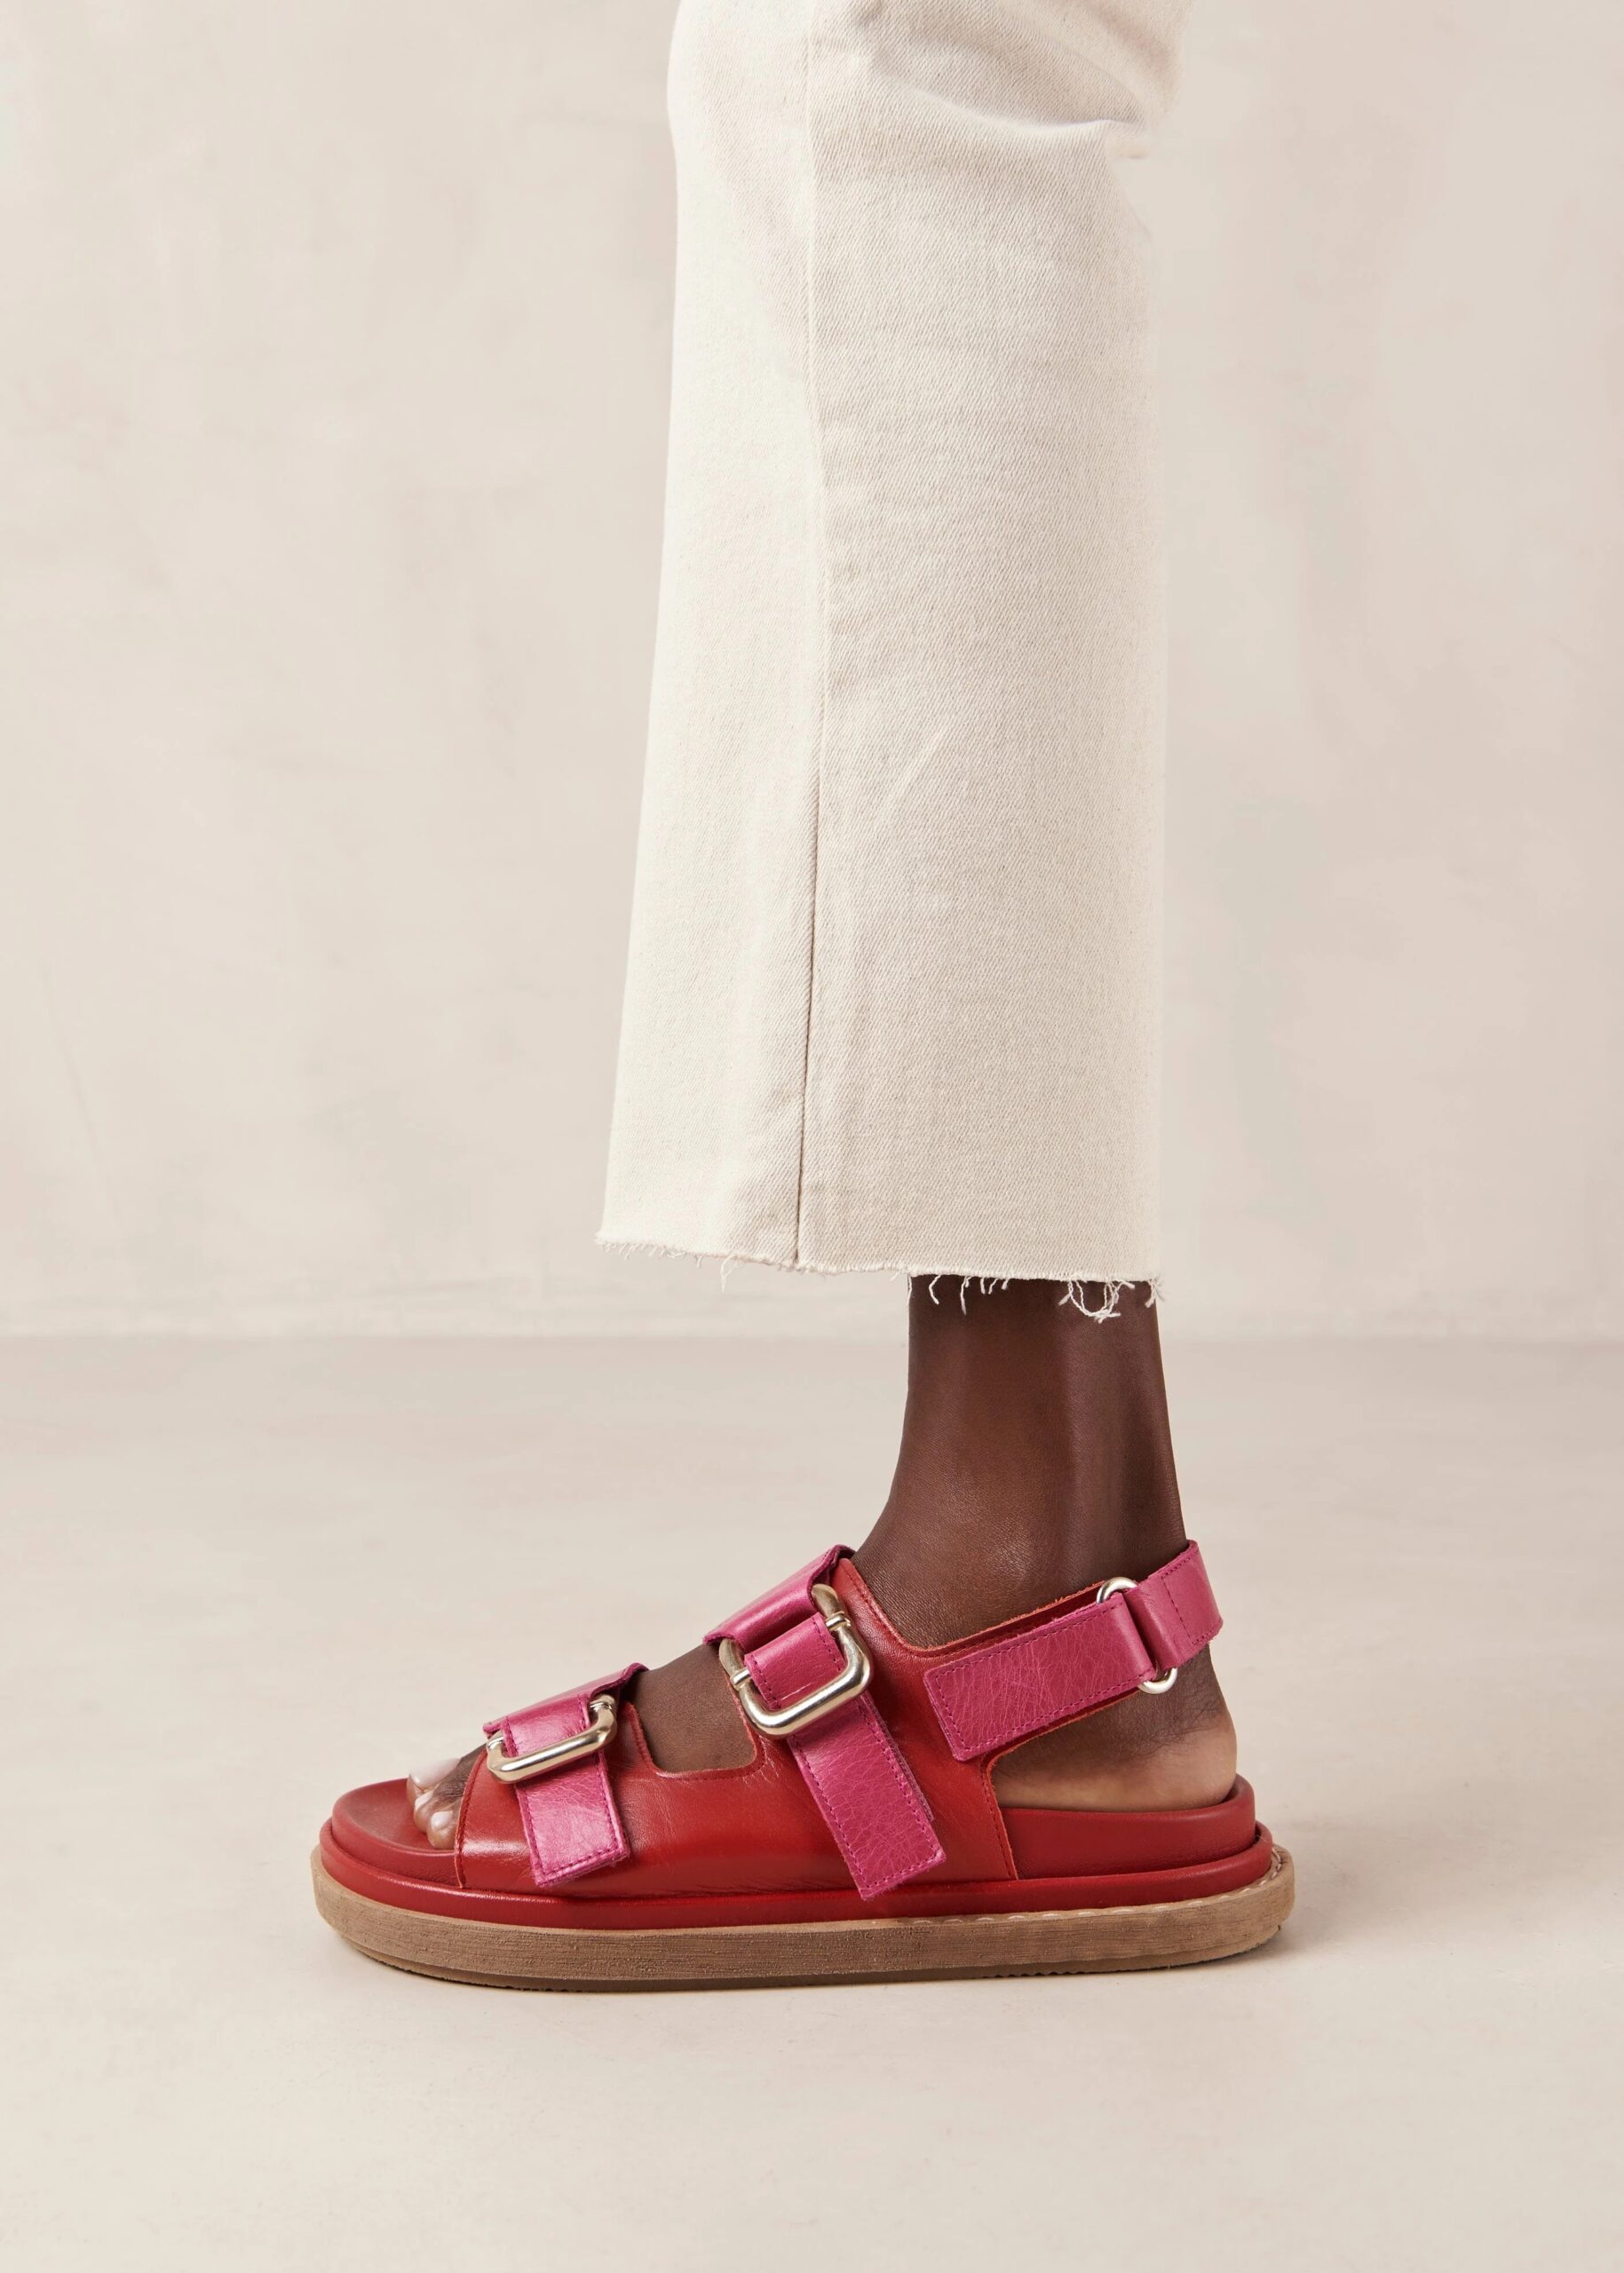 A model's legs in cream cut off jeans wearing red and pink leather Alohas sandals.